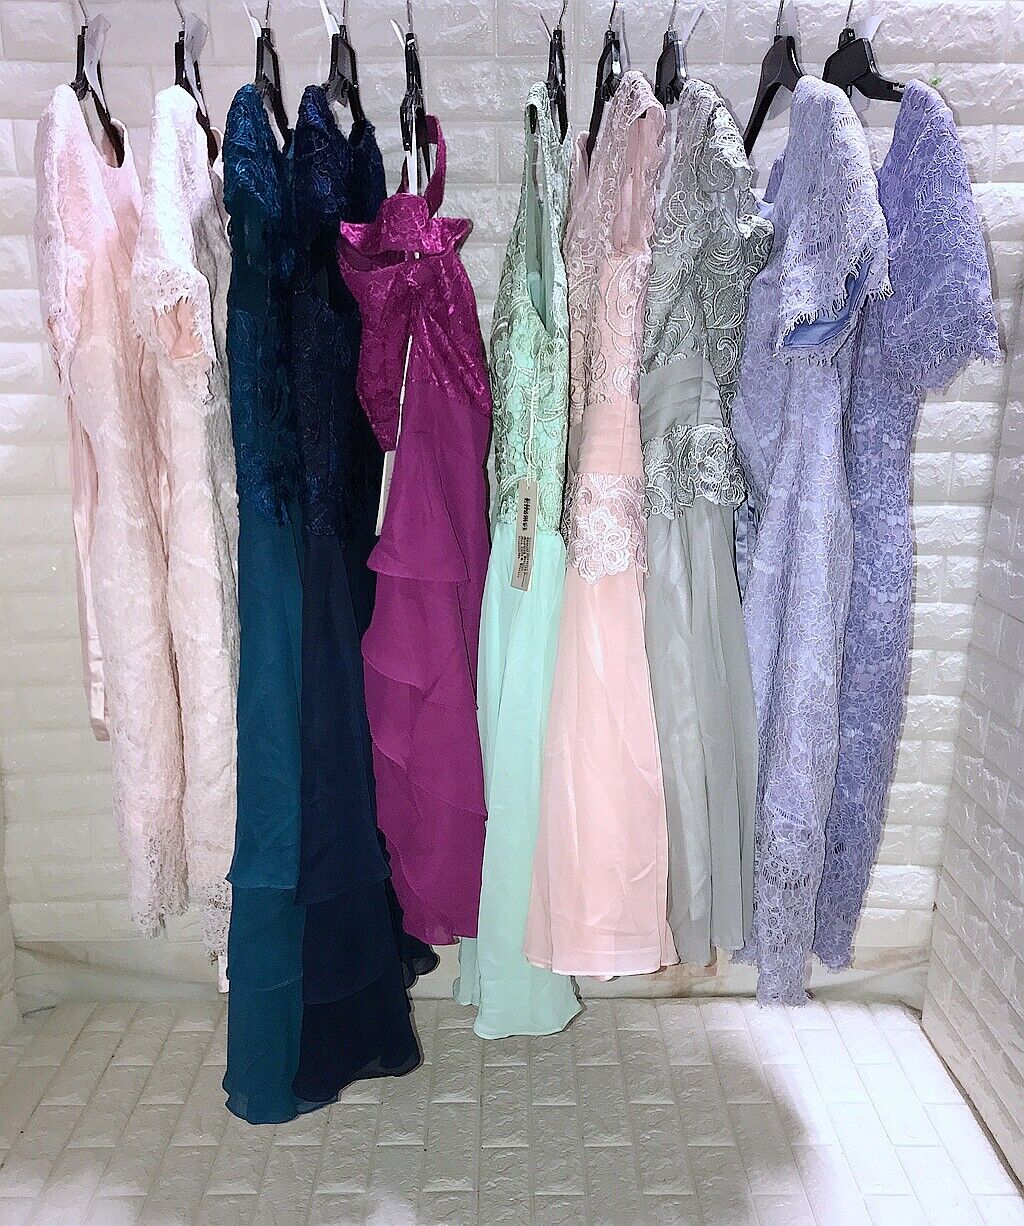 Wholesale Lot of 10 Women's Prom Bridesmaid dresses Formal Party Gown dress Без бренда